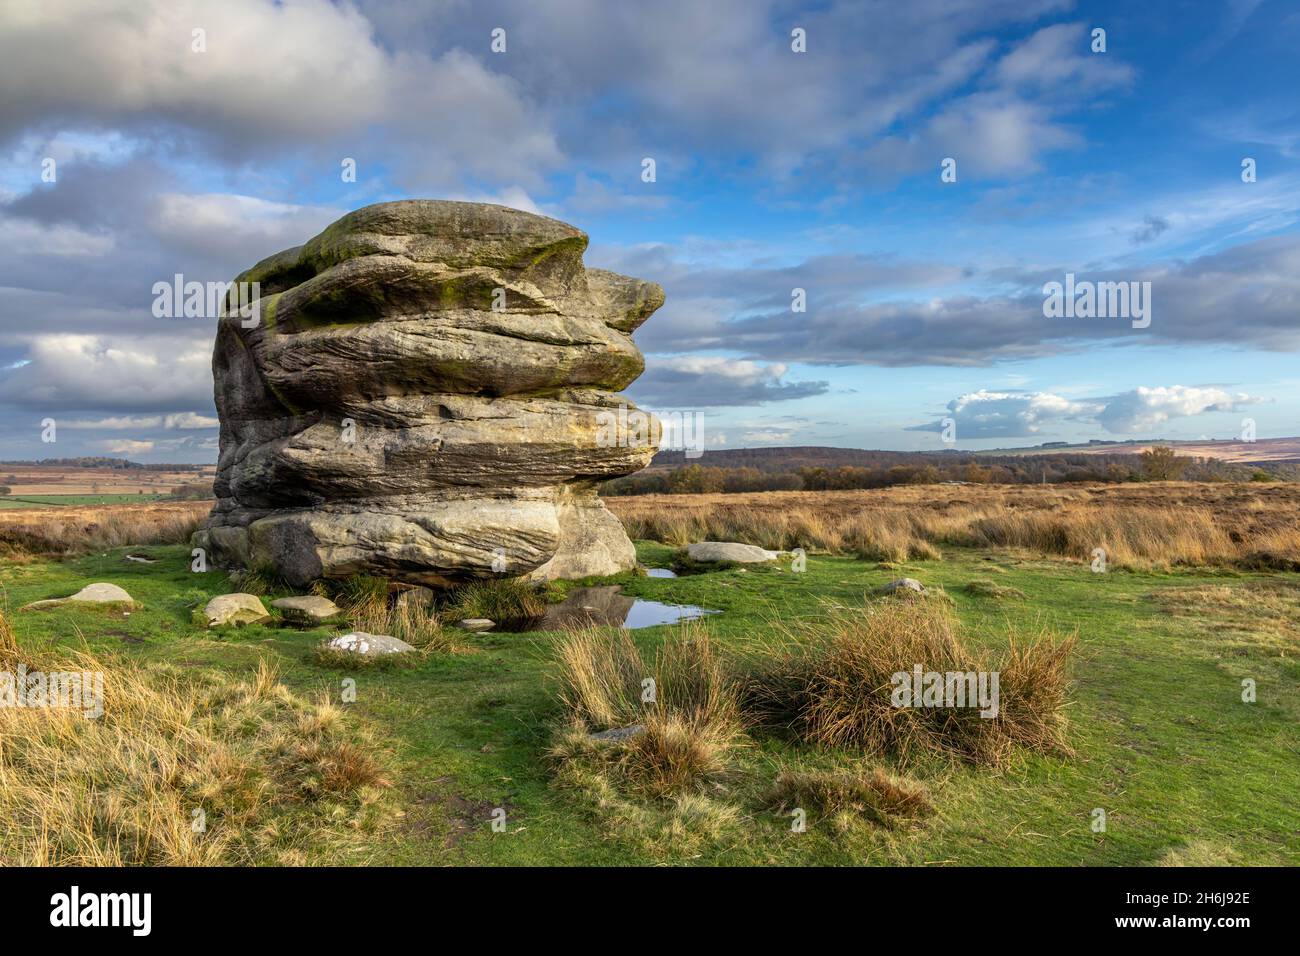 The large boulder known as Eagle Stone on moorland near Baslow Edge in the Peak District National Park, Derbyshire, England. Stock Photo